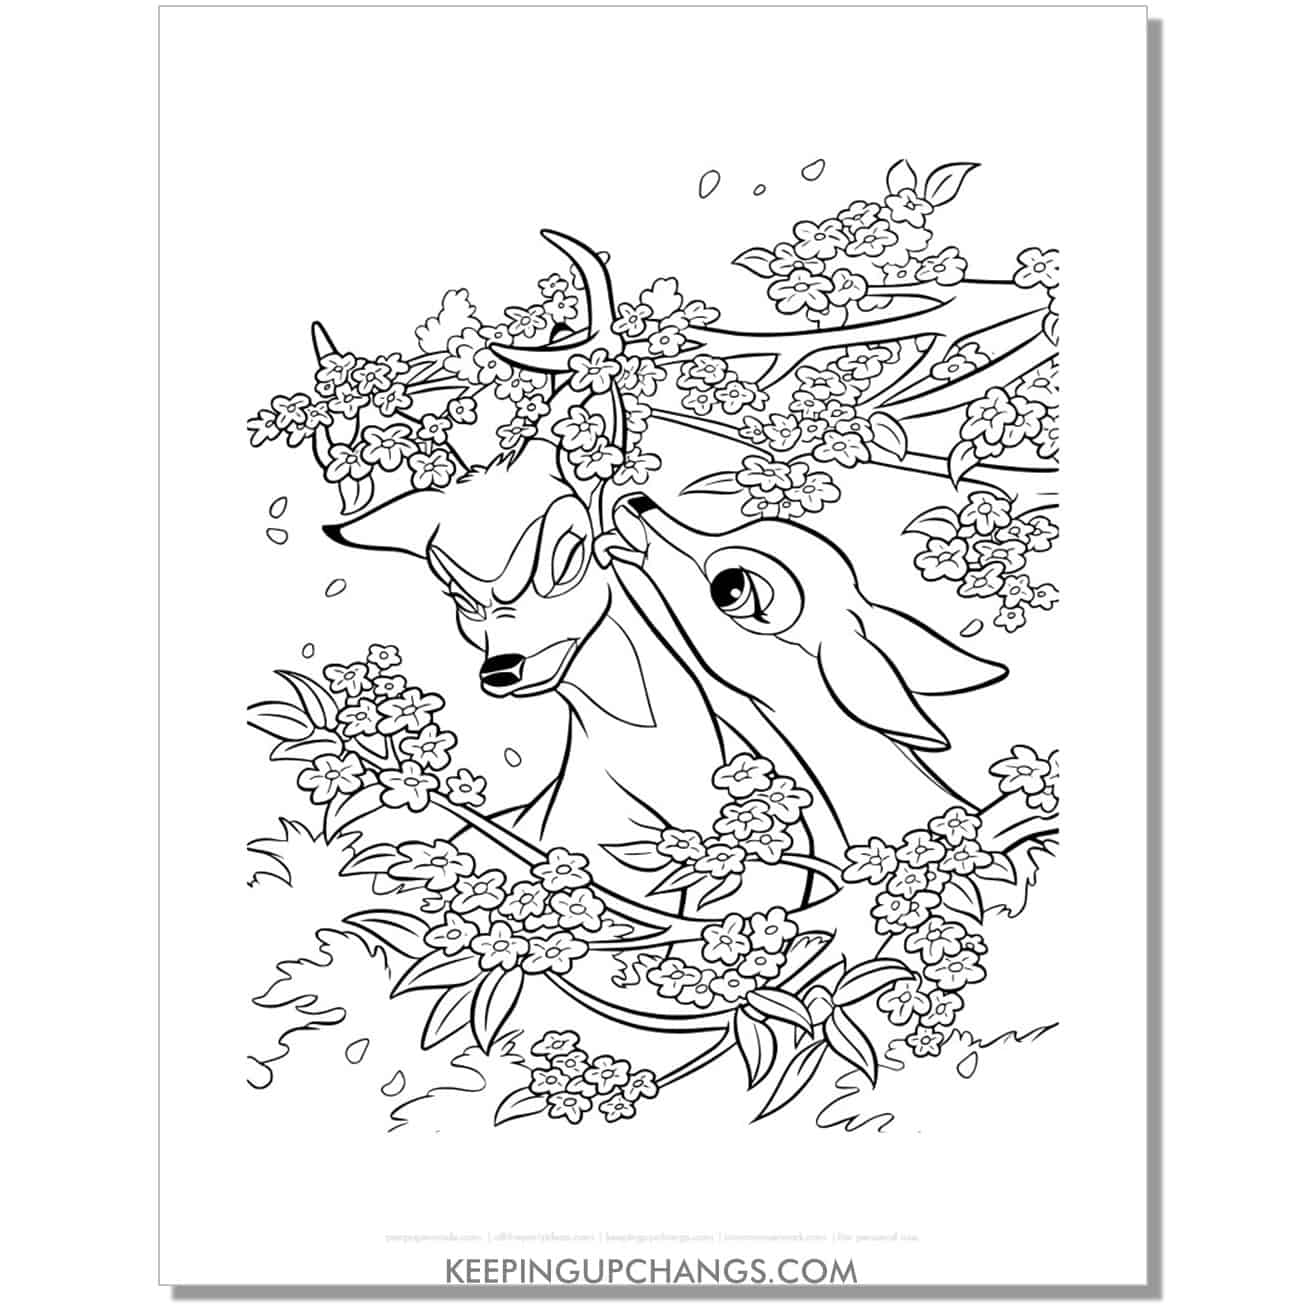 free bambi being licked by deer coloring page, sheet.